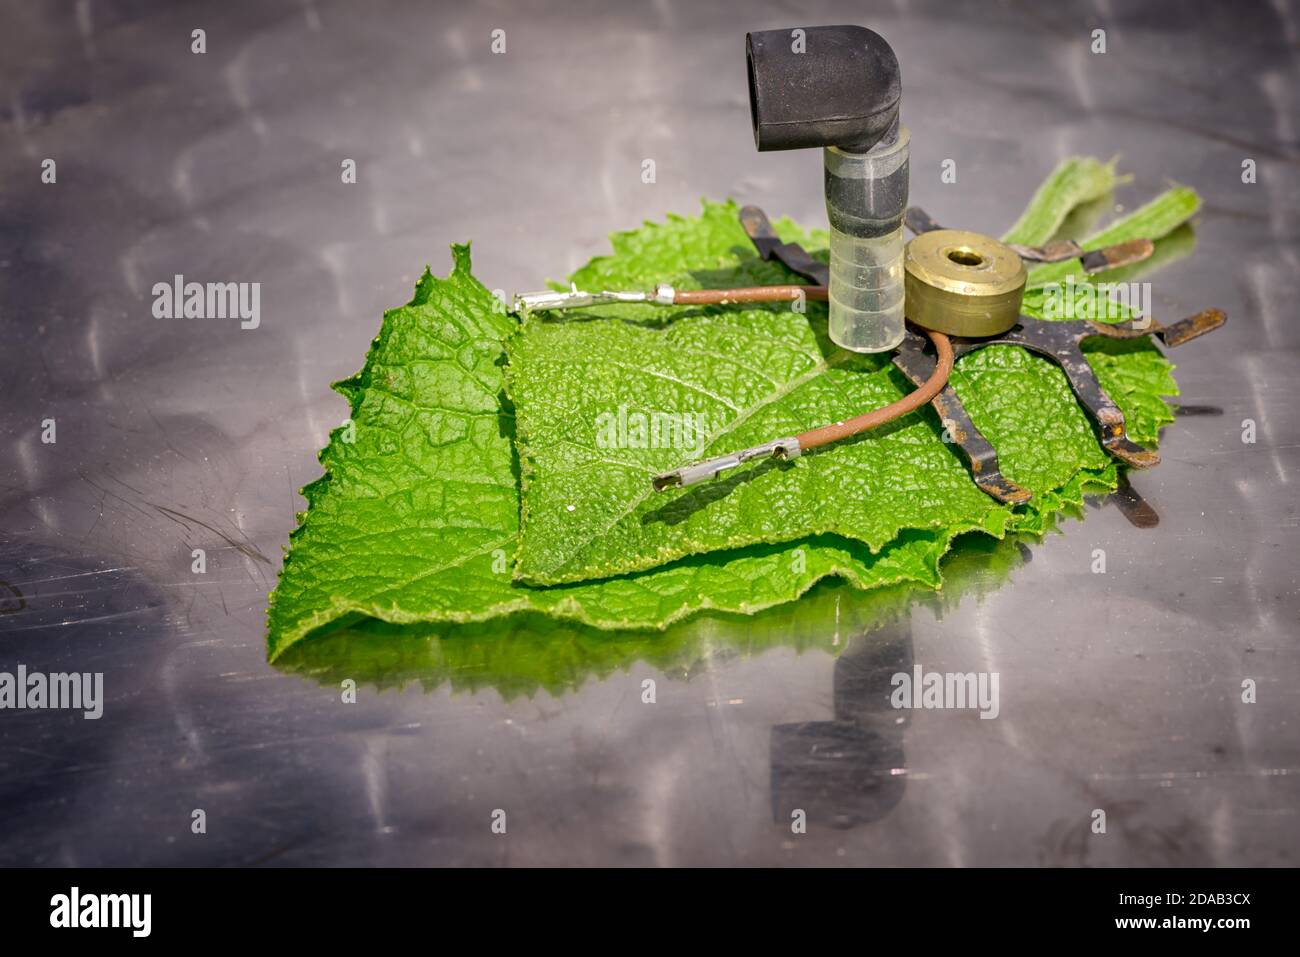 Scorpion robot from spares on a leaves on reflective table. Robotics lesson STEM education. Science and nature concept. Stock Photo